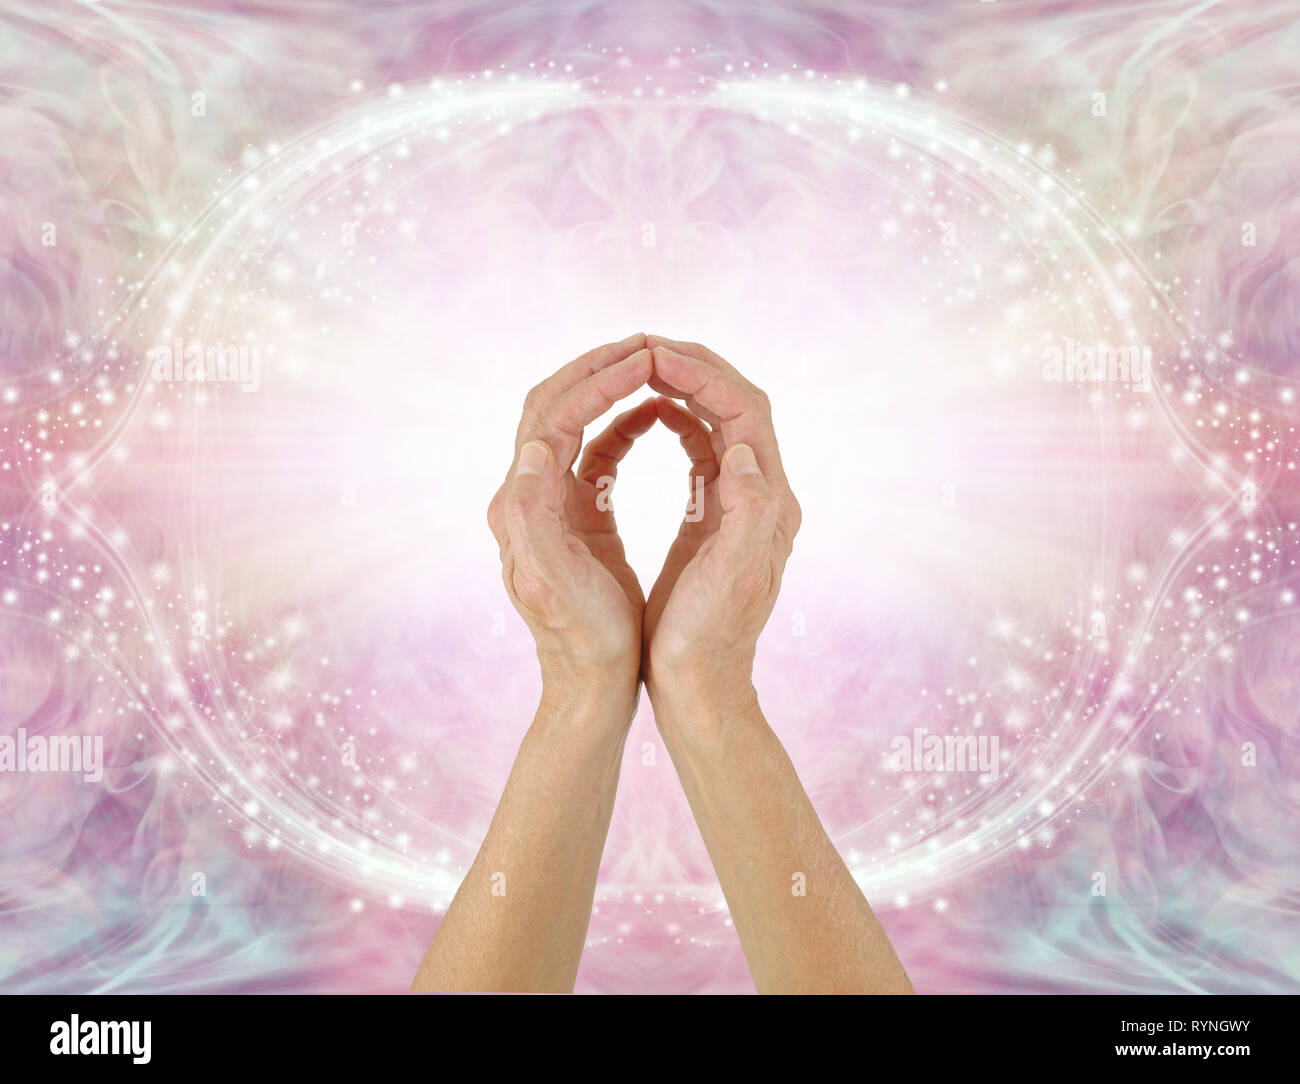 Healer sending Unconditional Love Healing Energy - female hands reaching up making an O shape with a bright white light against sparkling pink frame Stock Photo